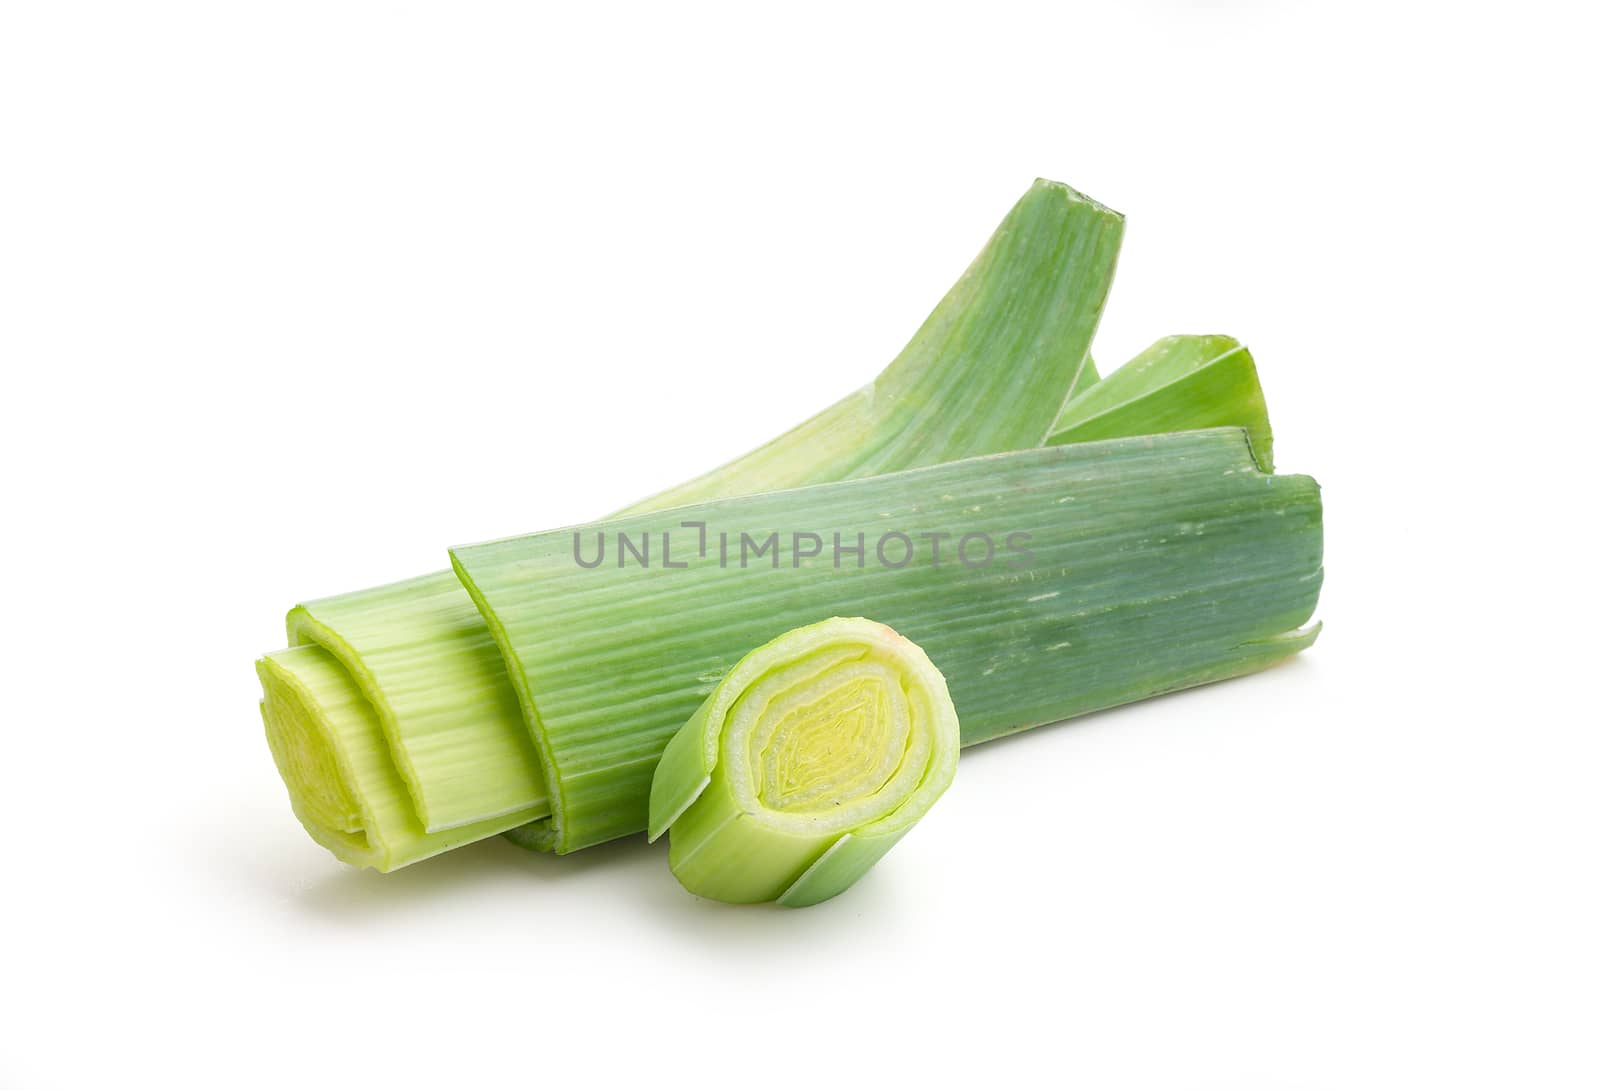 Isolated pieces of fresh green leek on the white background